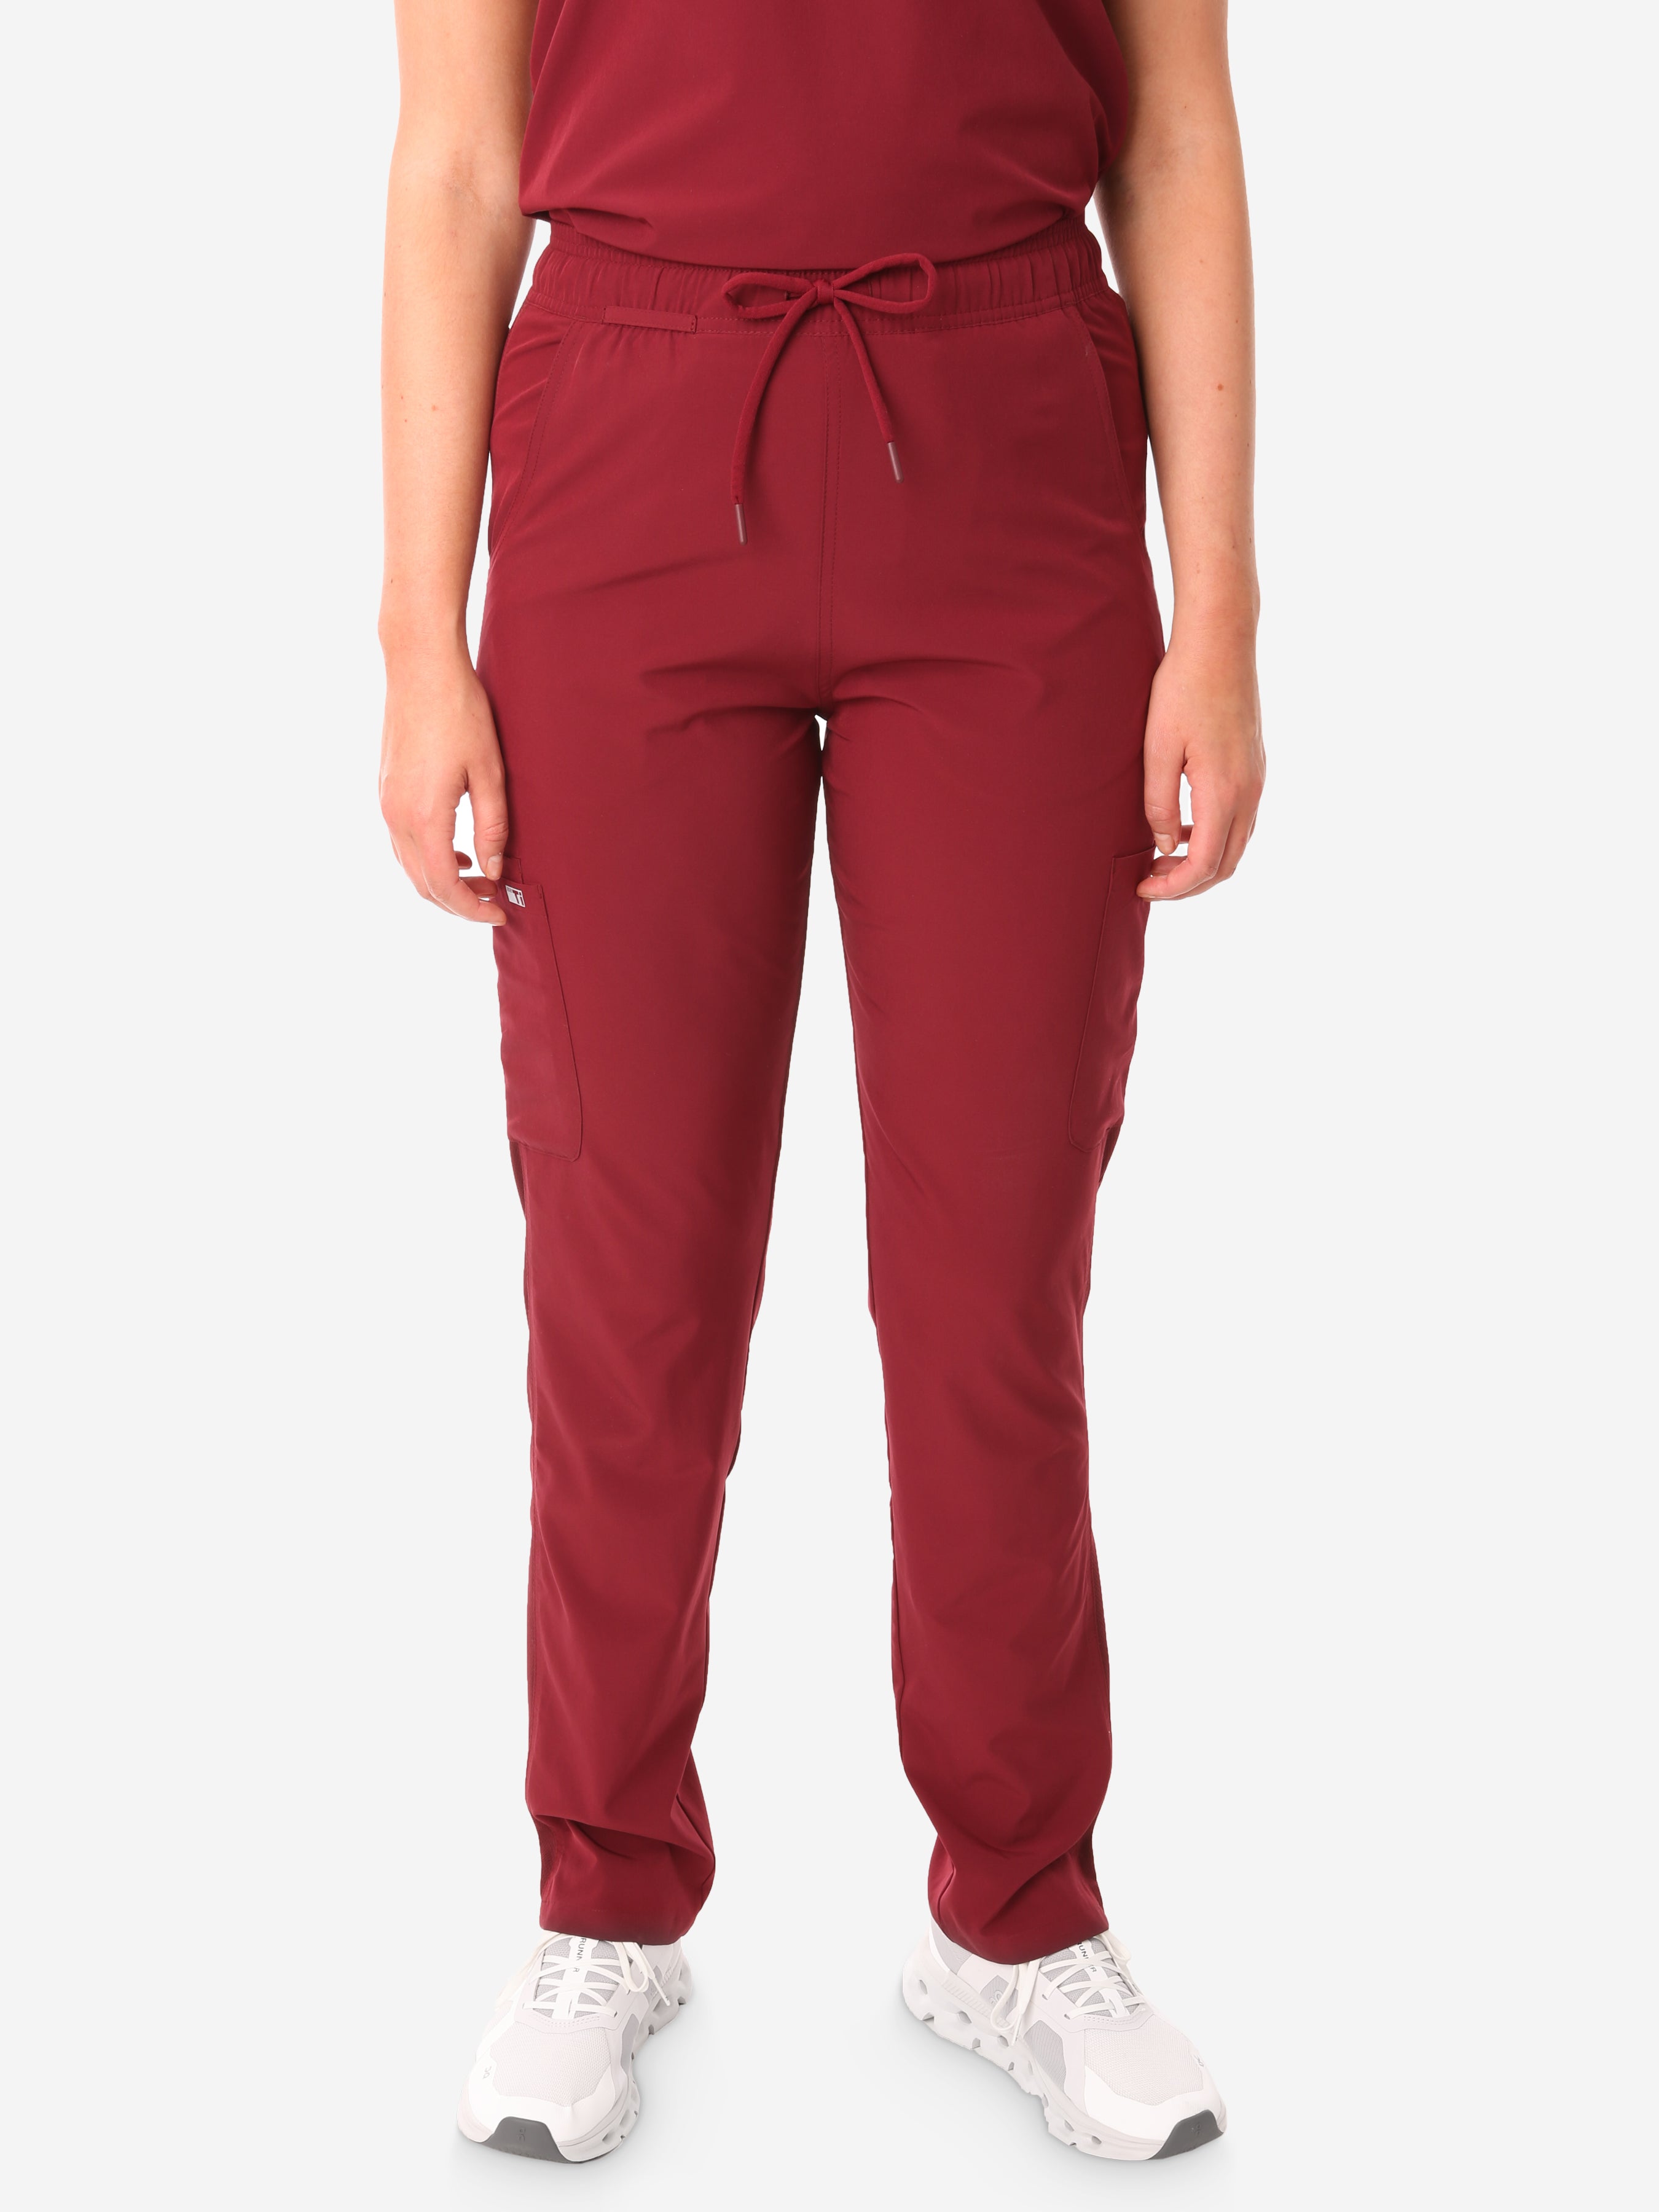 TiScrubs Bold Burgundy Women's Stretch 9-Pocket Pants Front View Pants Only